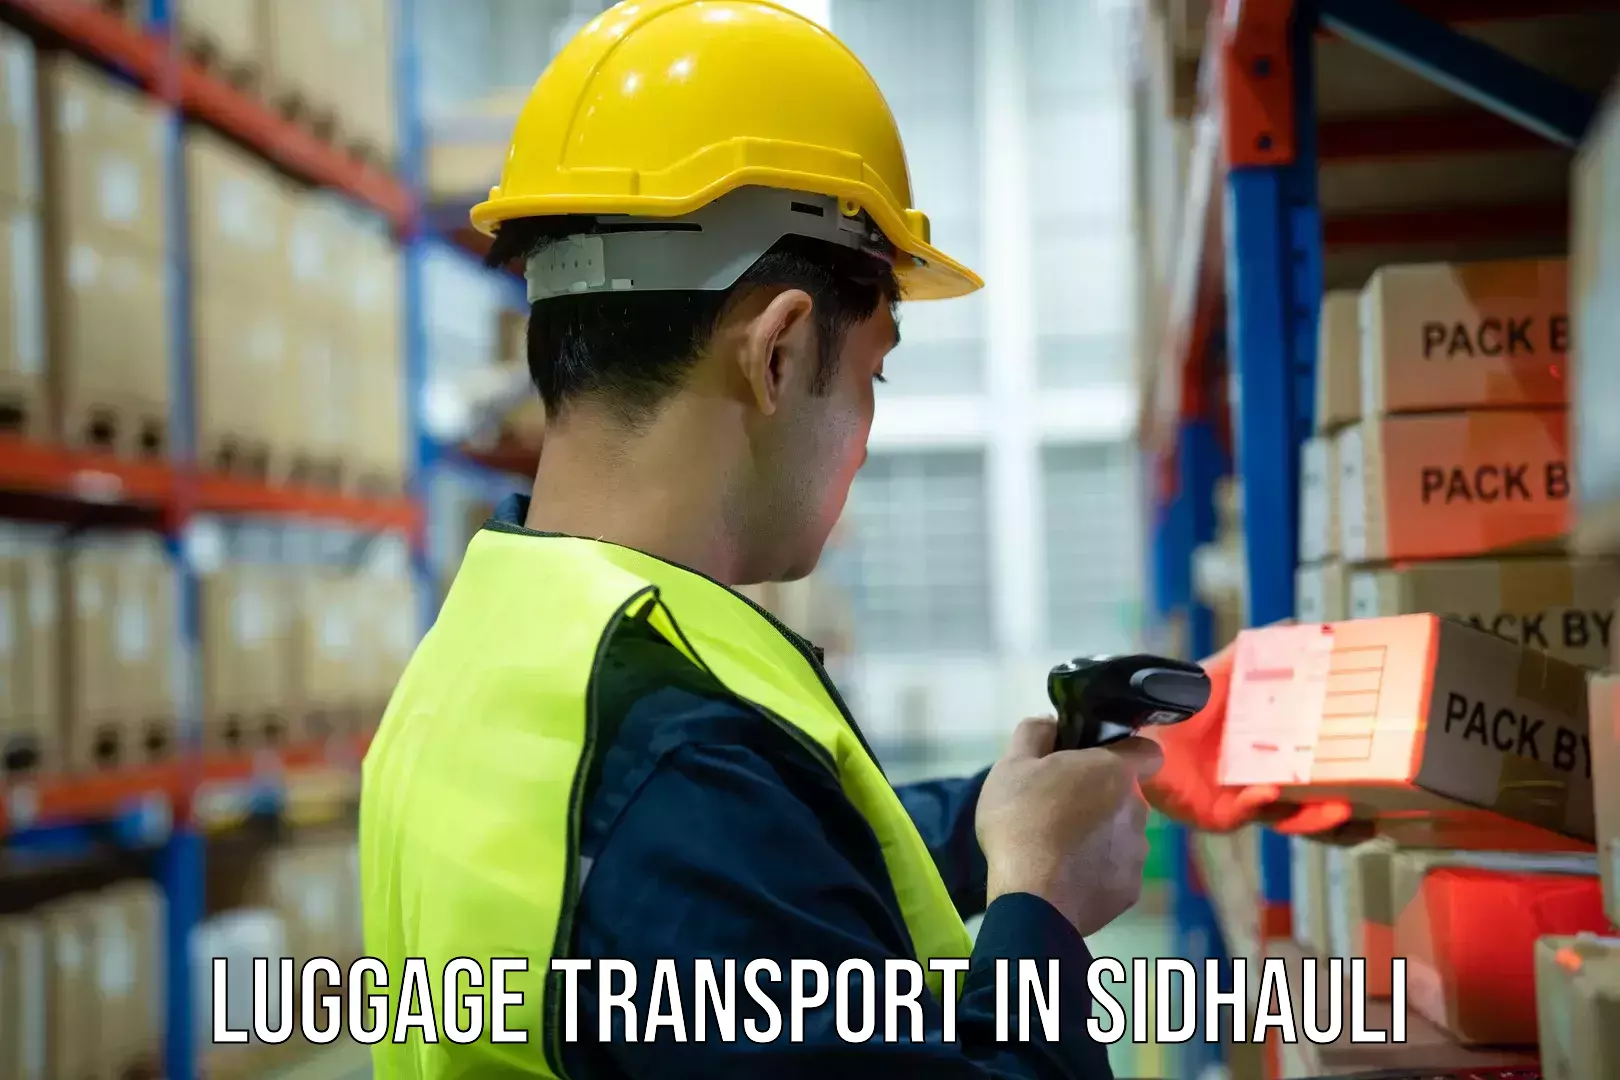 Luggage transport guidelines in Sidhauli